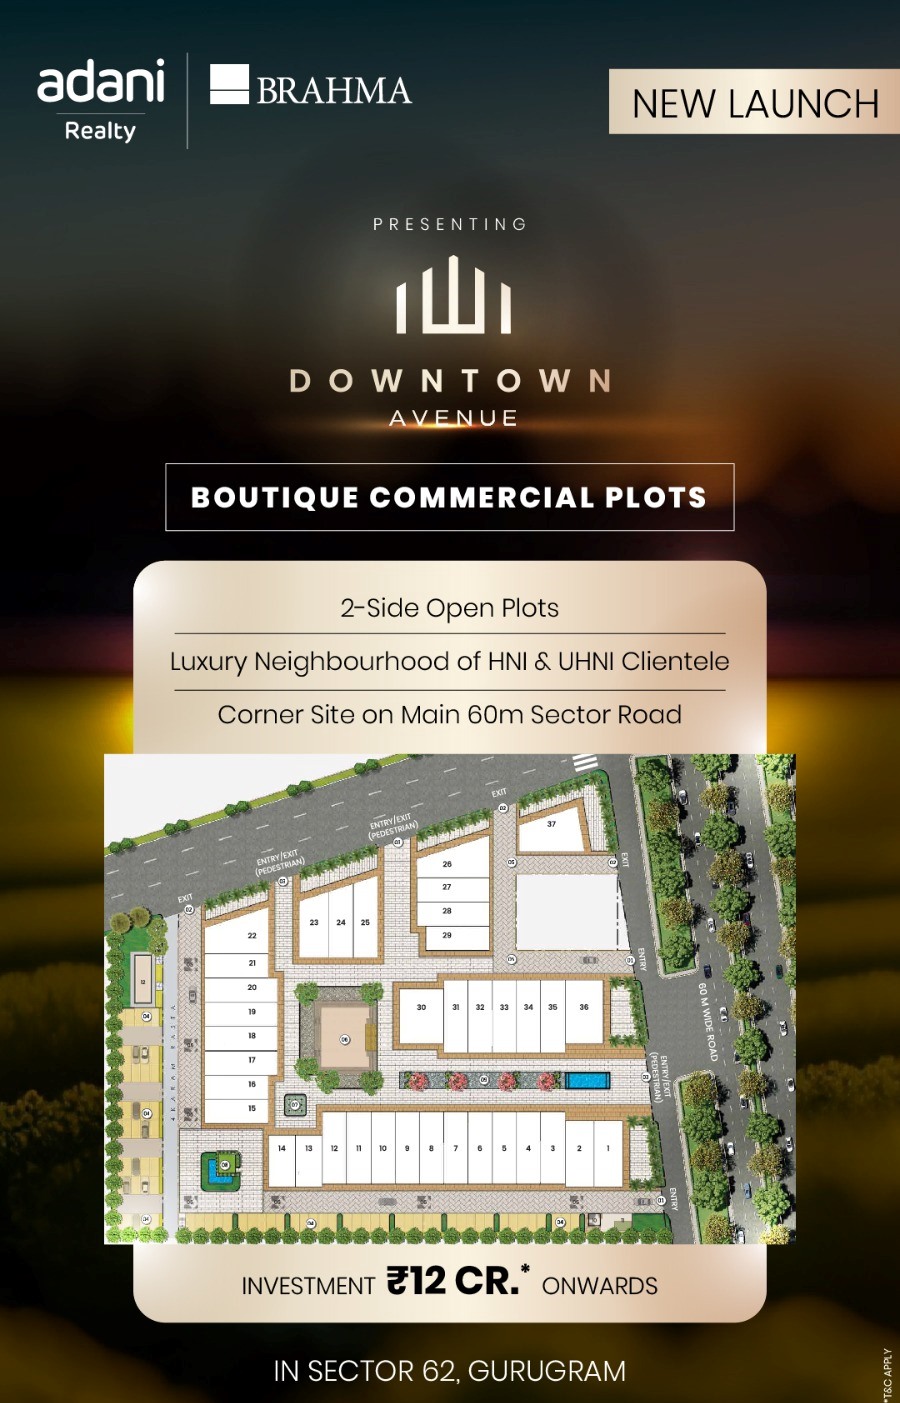 Boutique commercial plots at Adani Downtown Avenue in Sector 62, Gurgaon Update